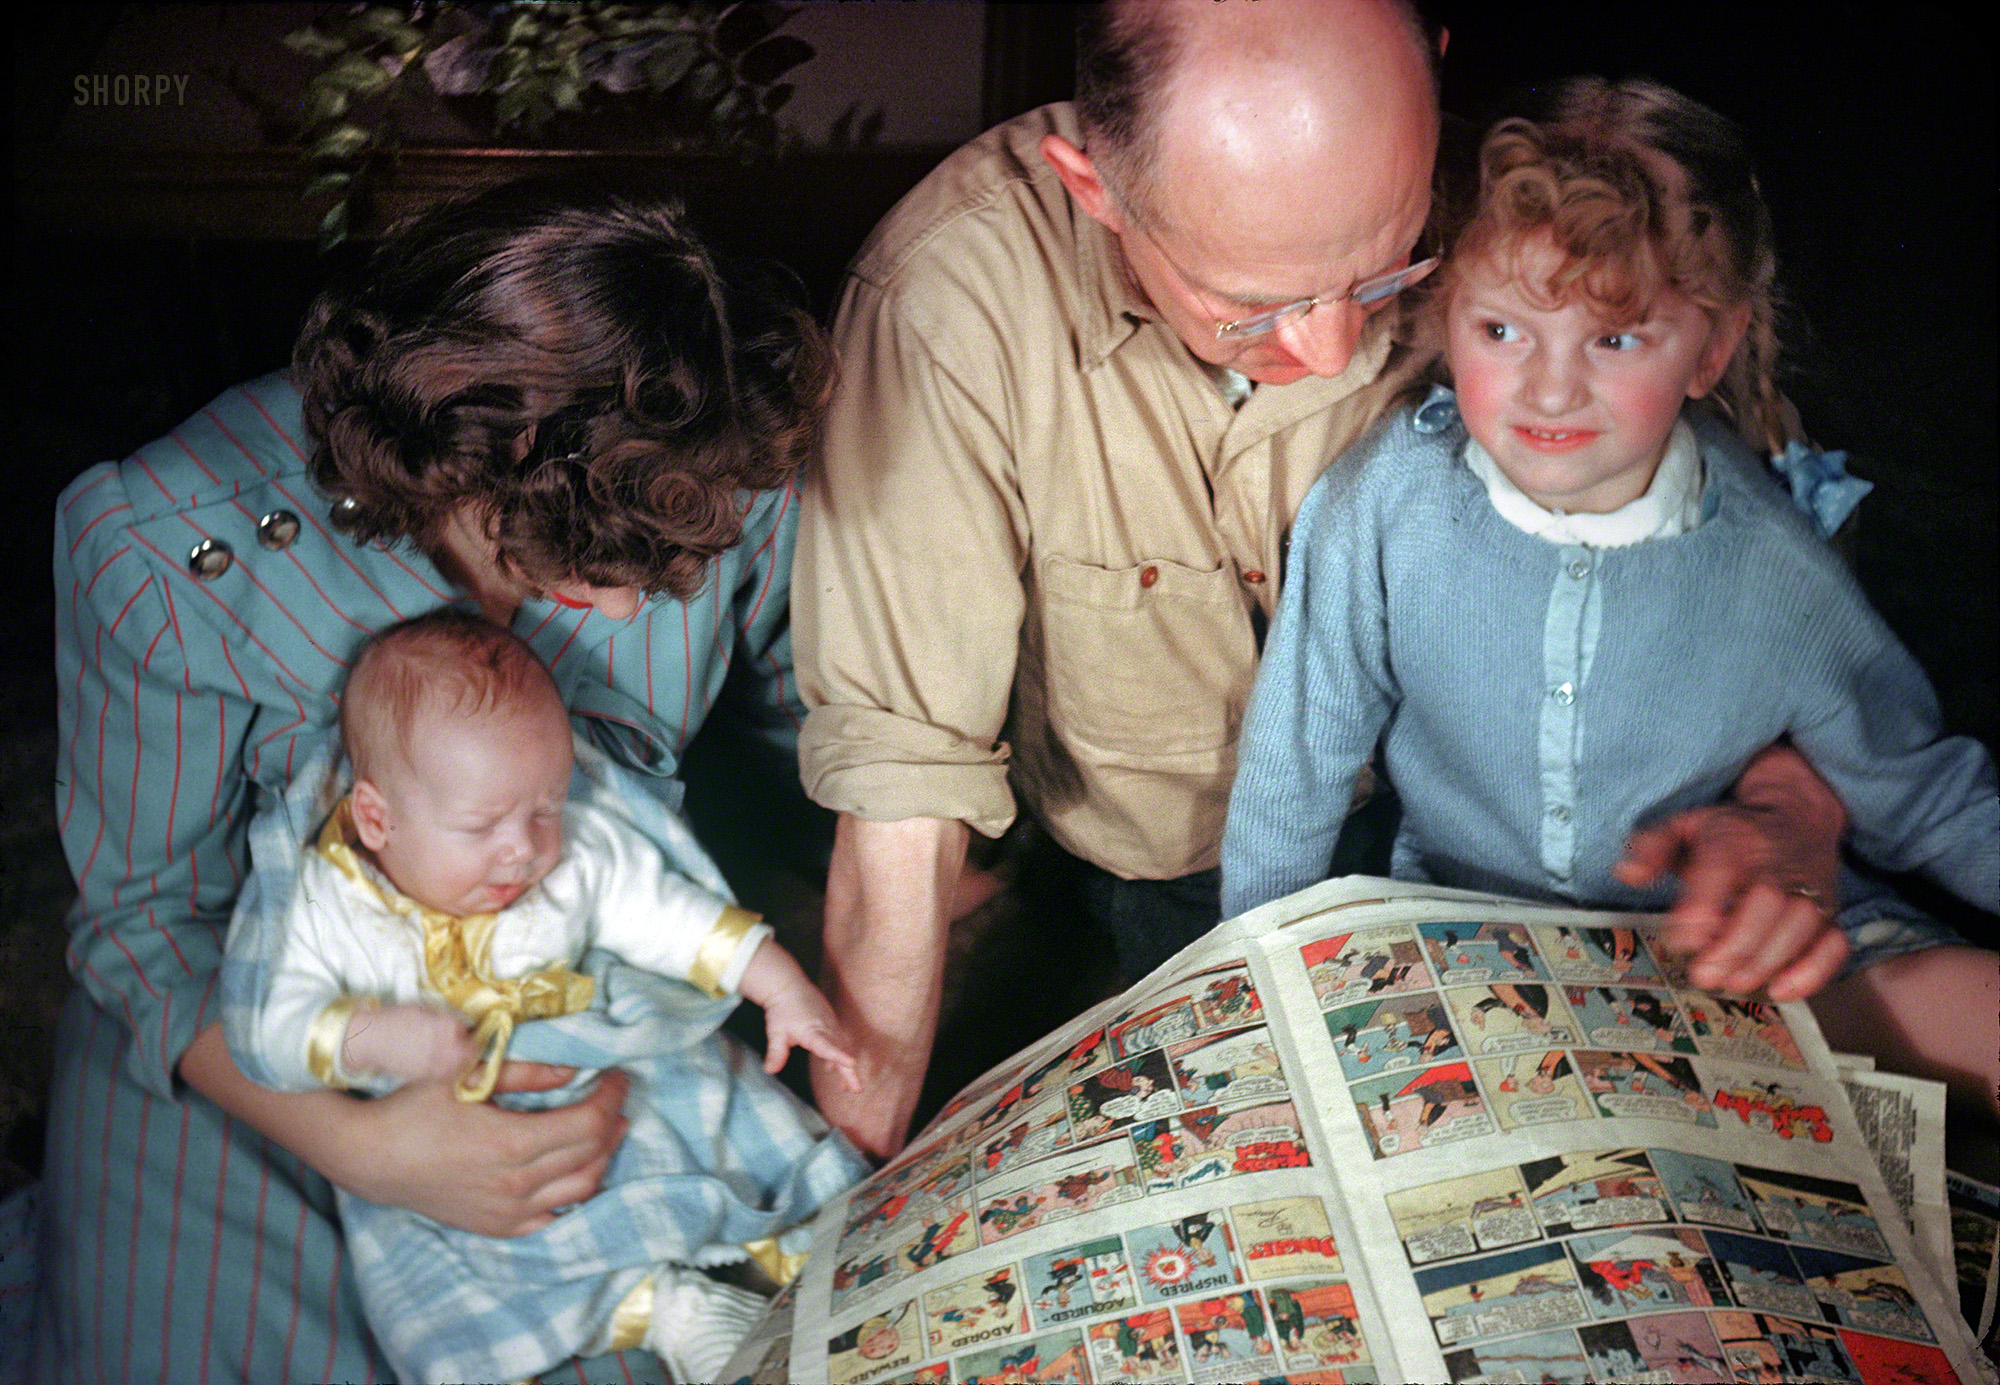 Our Michigan mom (last seen here) is back with the kids and Grandpa, paging through the Sunday comics. 35mm Kodachrome slide dated 1947. View full size.